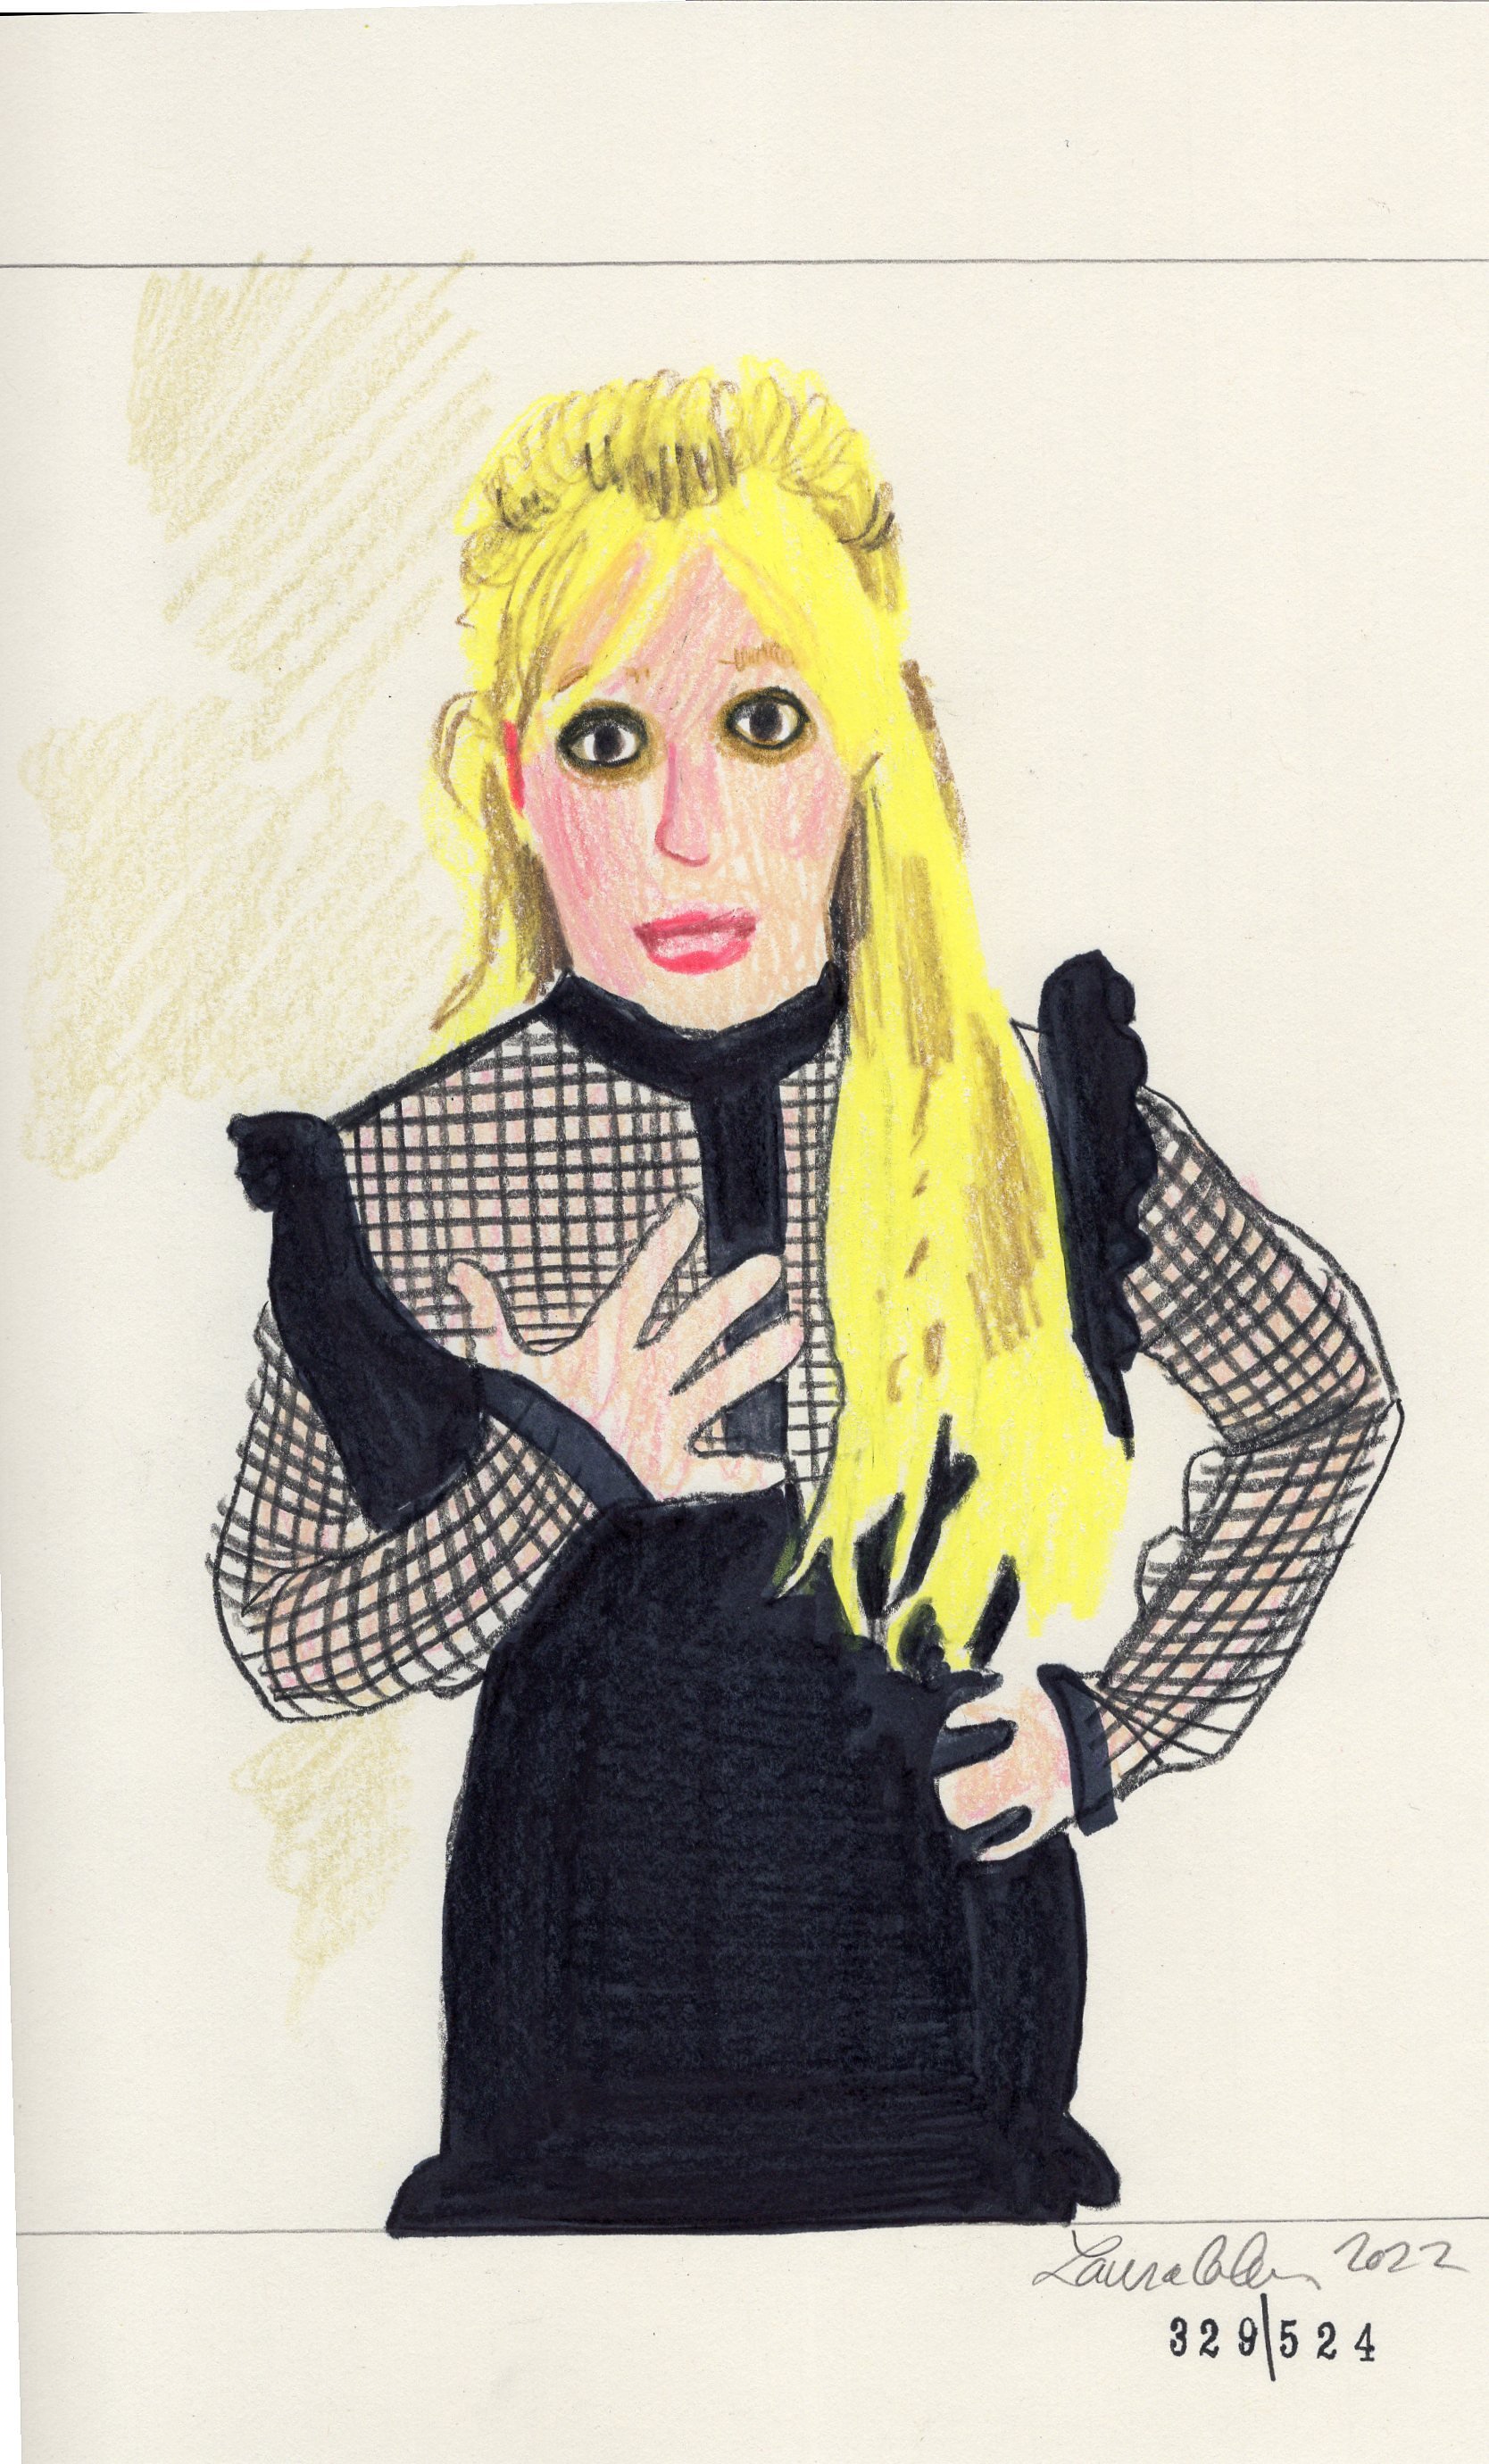 Laura Collins Britney Spears Animation 6x9in mixed media 2022 no329.jpg